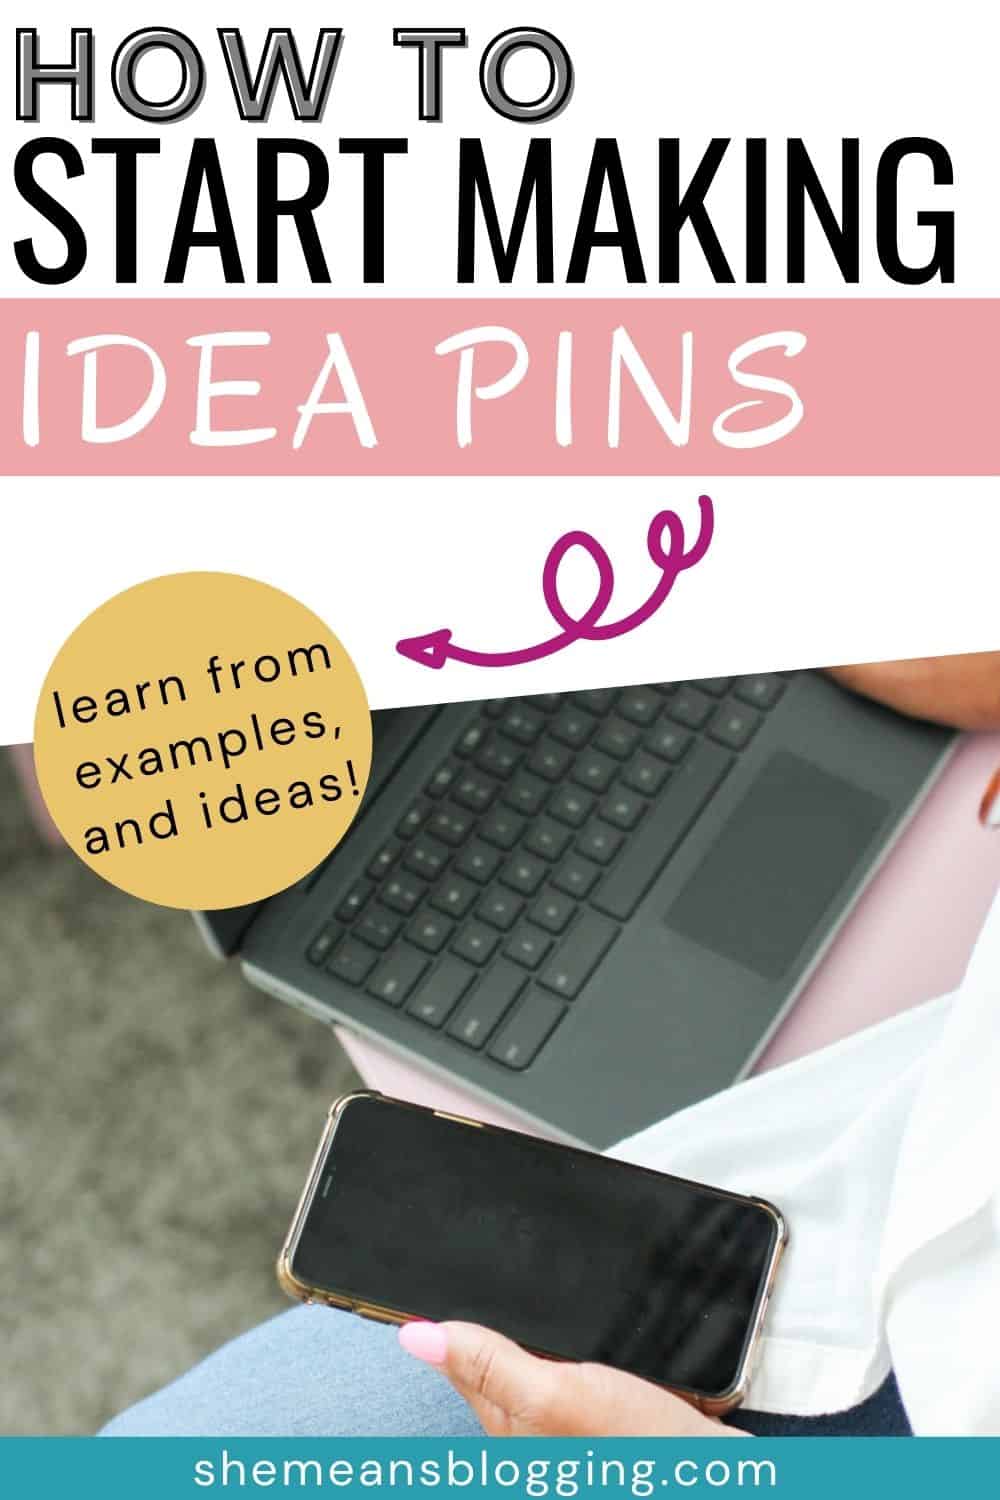 How to make idea pins on Pinterest. Learn everything about using idea pins to get impressions and increase your pinterest traffic. Pinterest idea pins best practices. Idea pin examples.